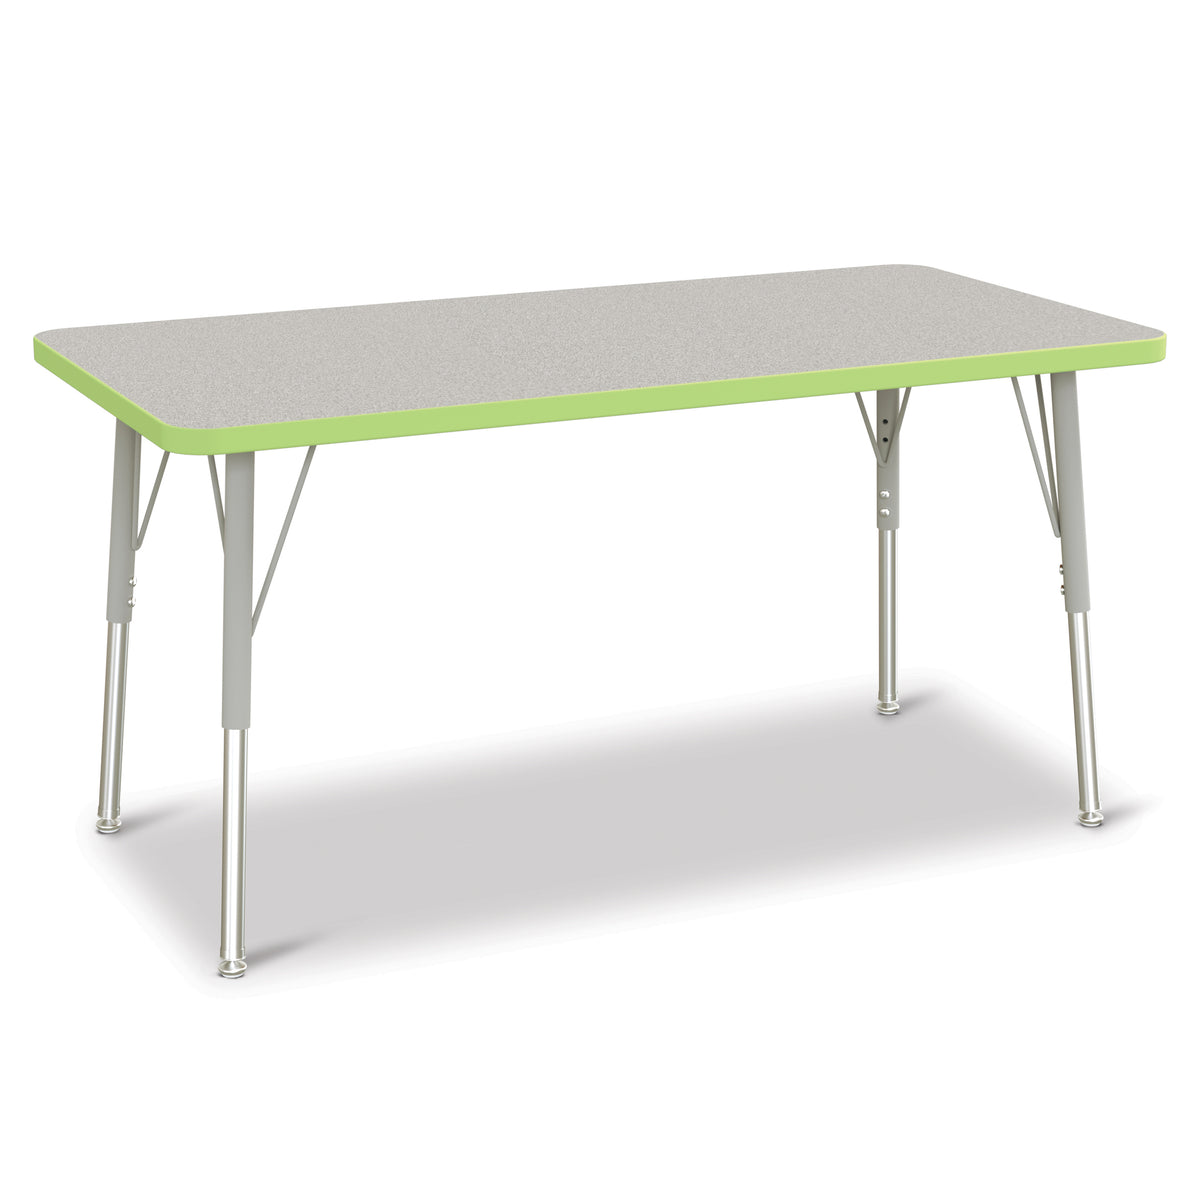 6403JCA131, Berries Rectangle Activity Table - 24" X 48", A-height - Freckled Gray/Coastal Blue/Gray